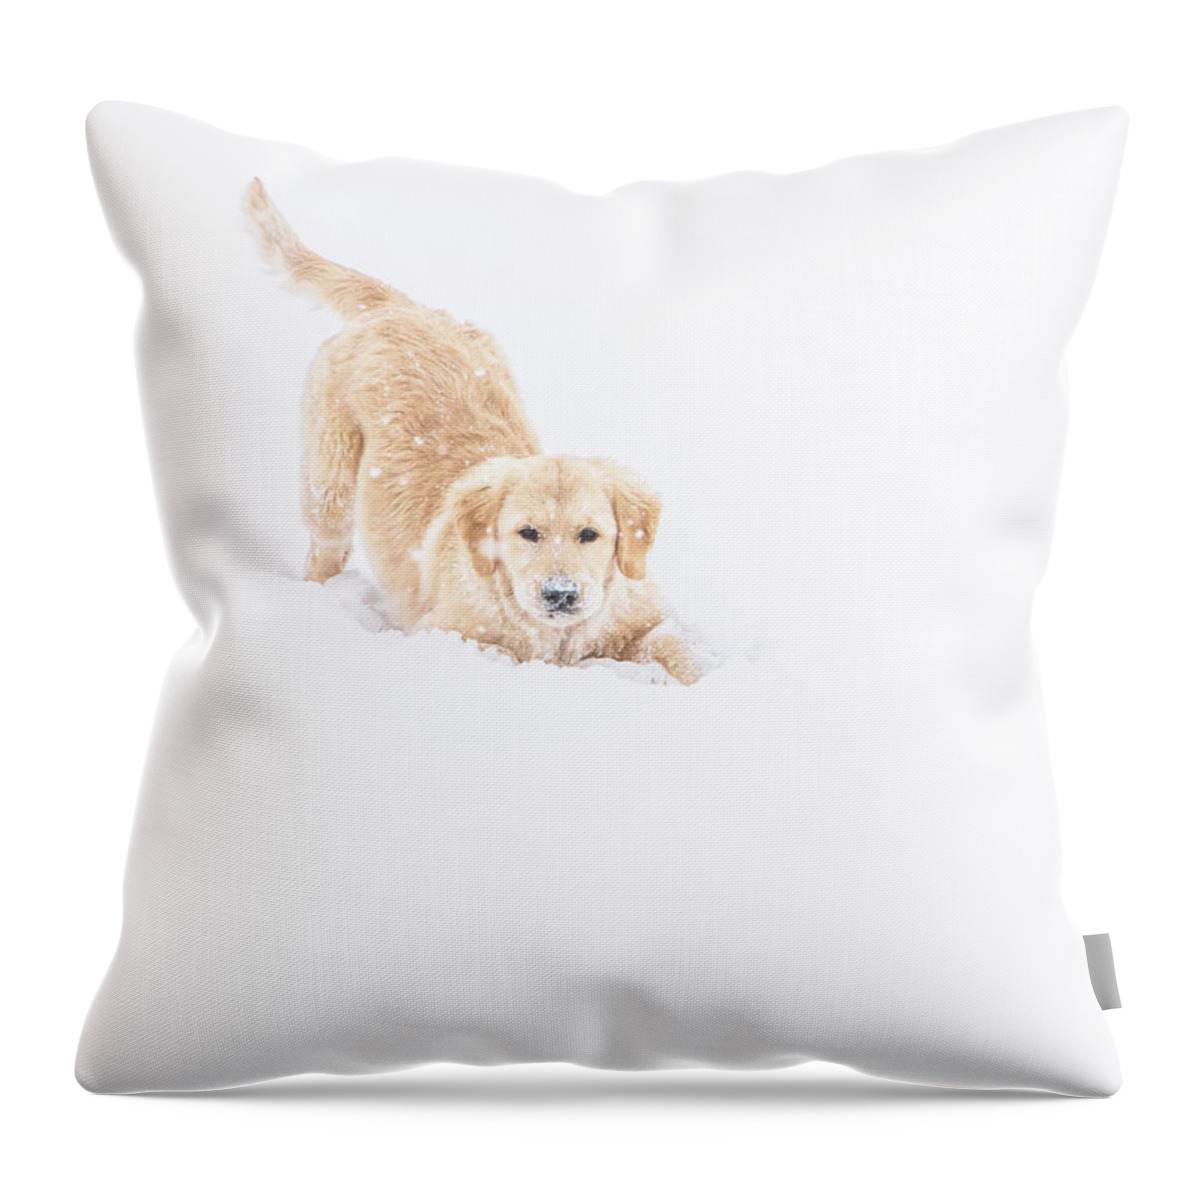 Playful Throw Pillow featuring the photograph Playful Puppy In So Much Snow by Jennifer Grossnickle